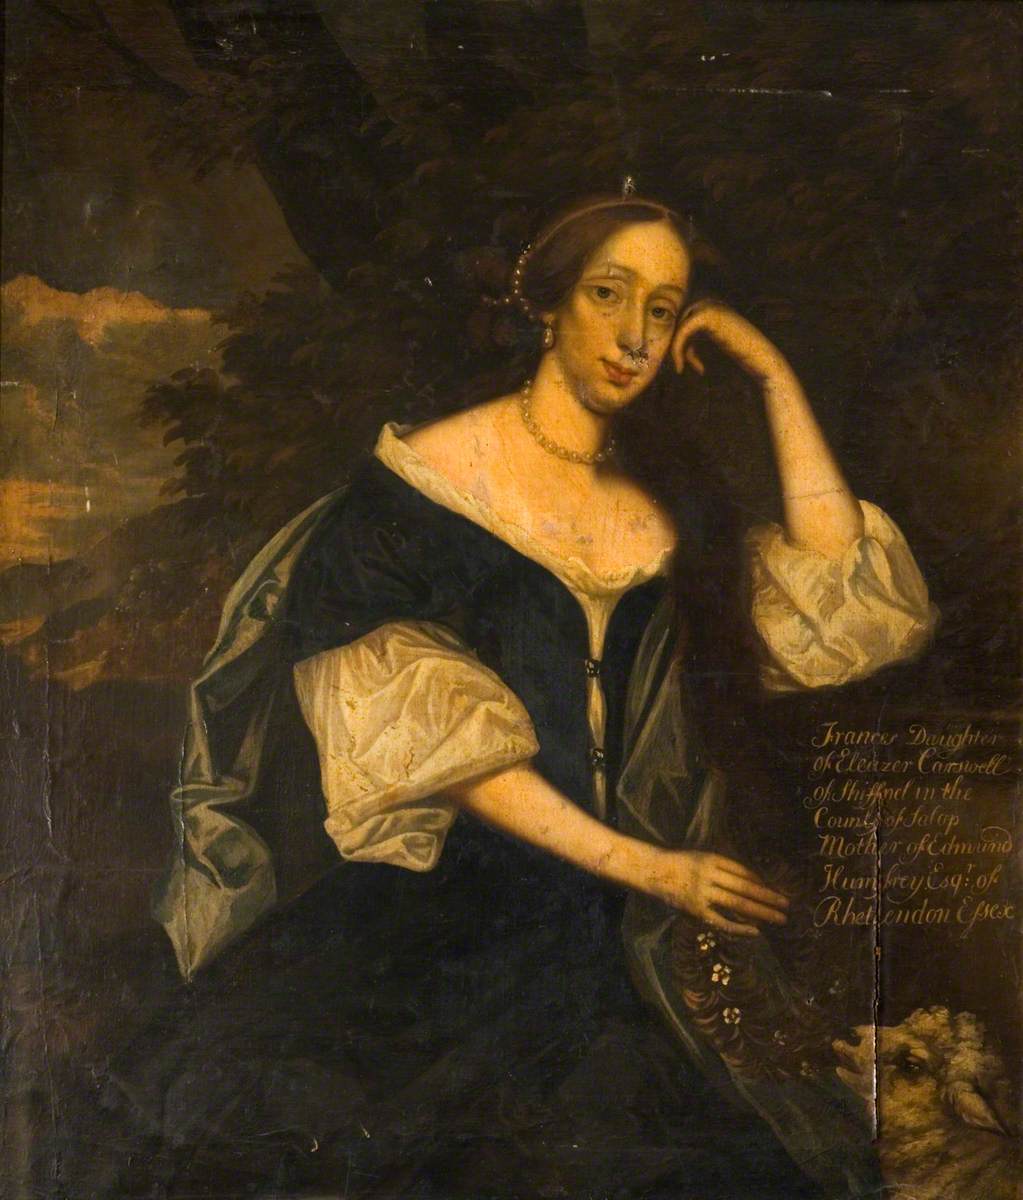 Frances Carswell, Mother of Edmund Humfrey of Rettendon